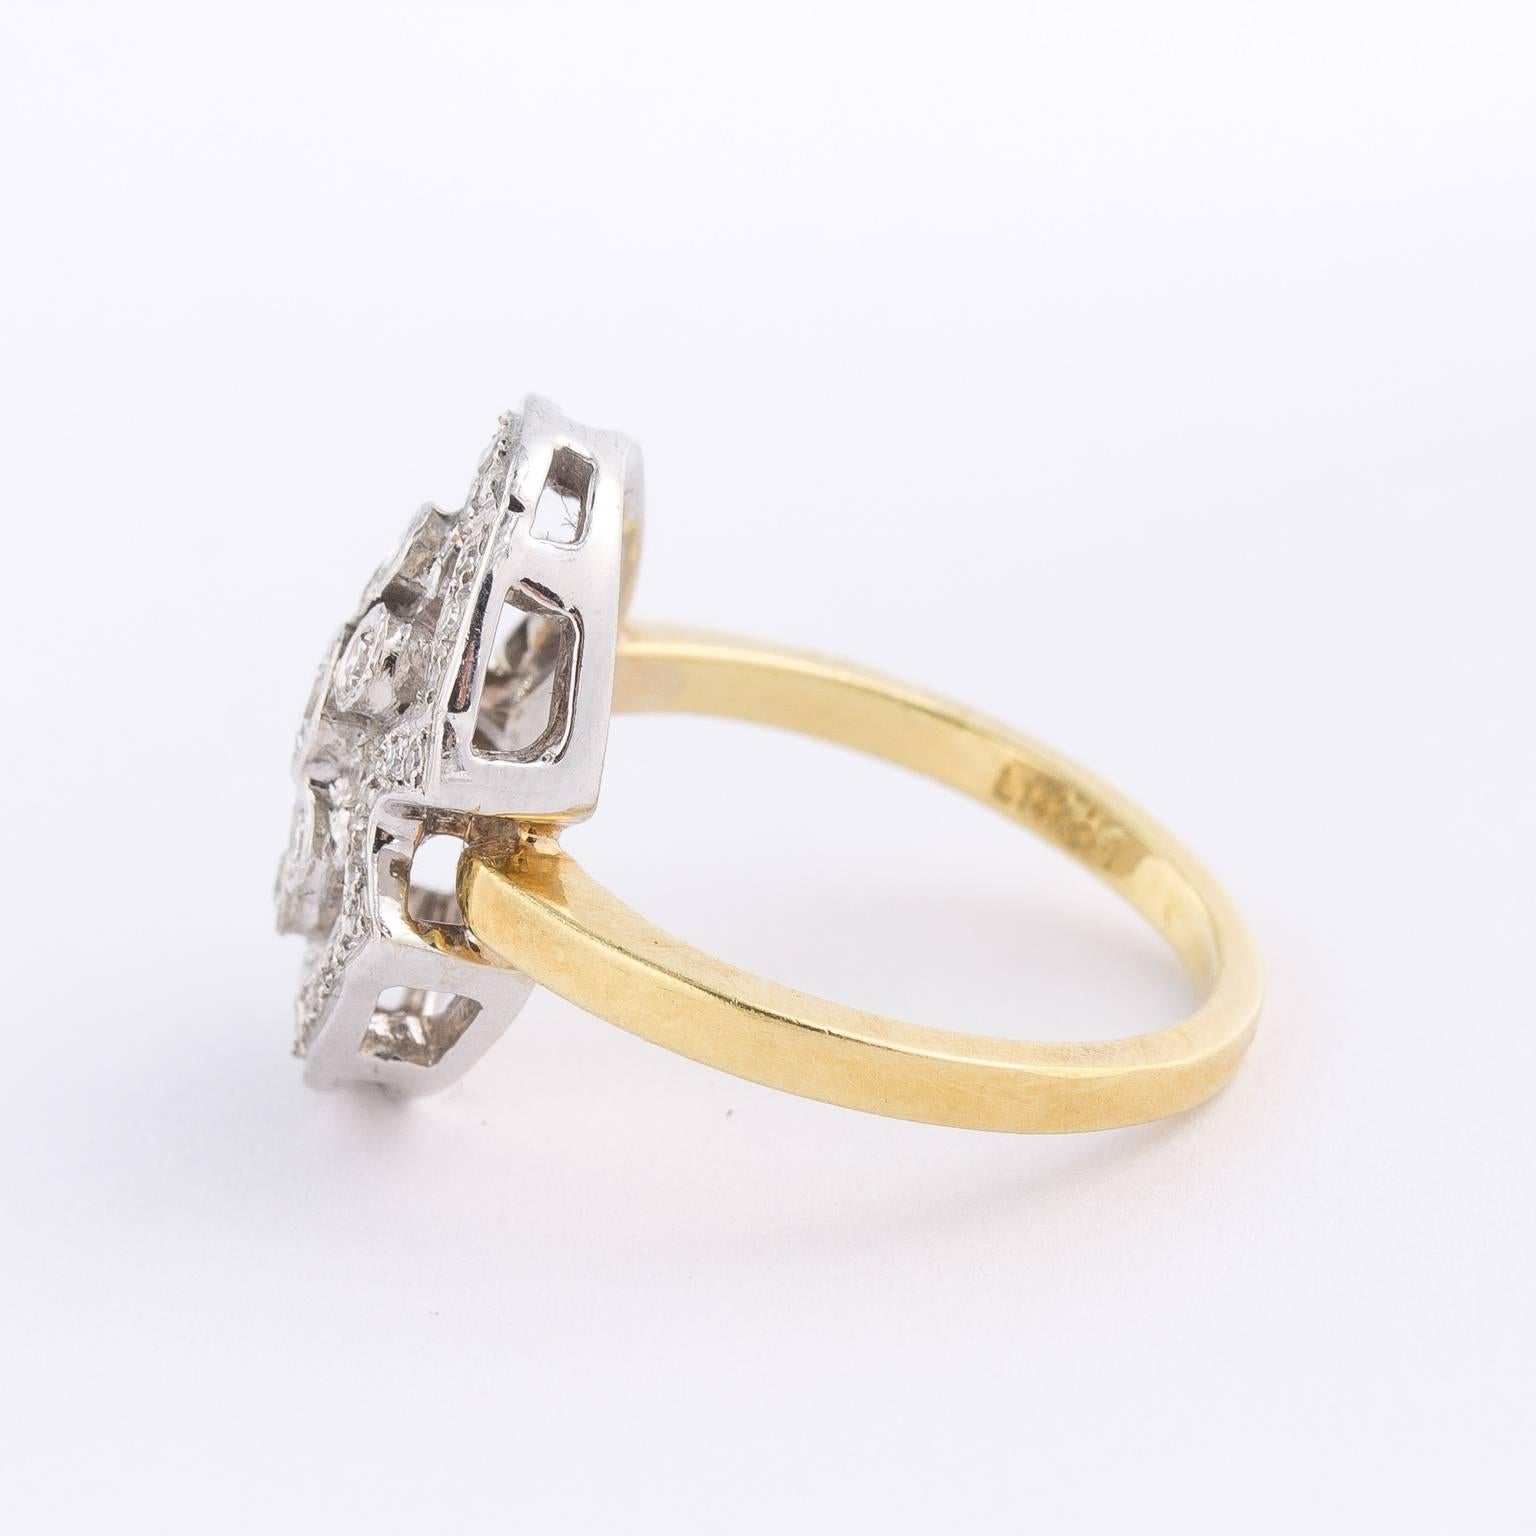  1940s diamond ring on 14KT. with multi vintage diamonds weighing approx 1.75ct in total.Very good quality diamonds. 14kt and diamonds. 1940s. Diamond cocktail ring. Unknown origin.Excellent-wear consistent with age. Size 6 1/2. 